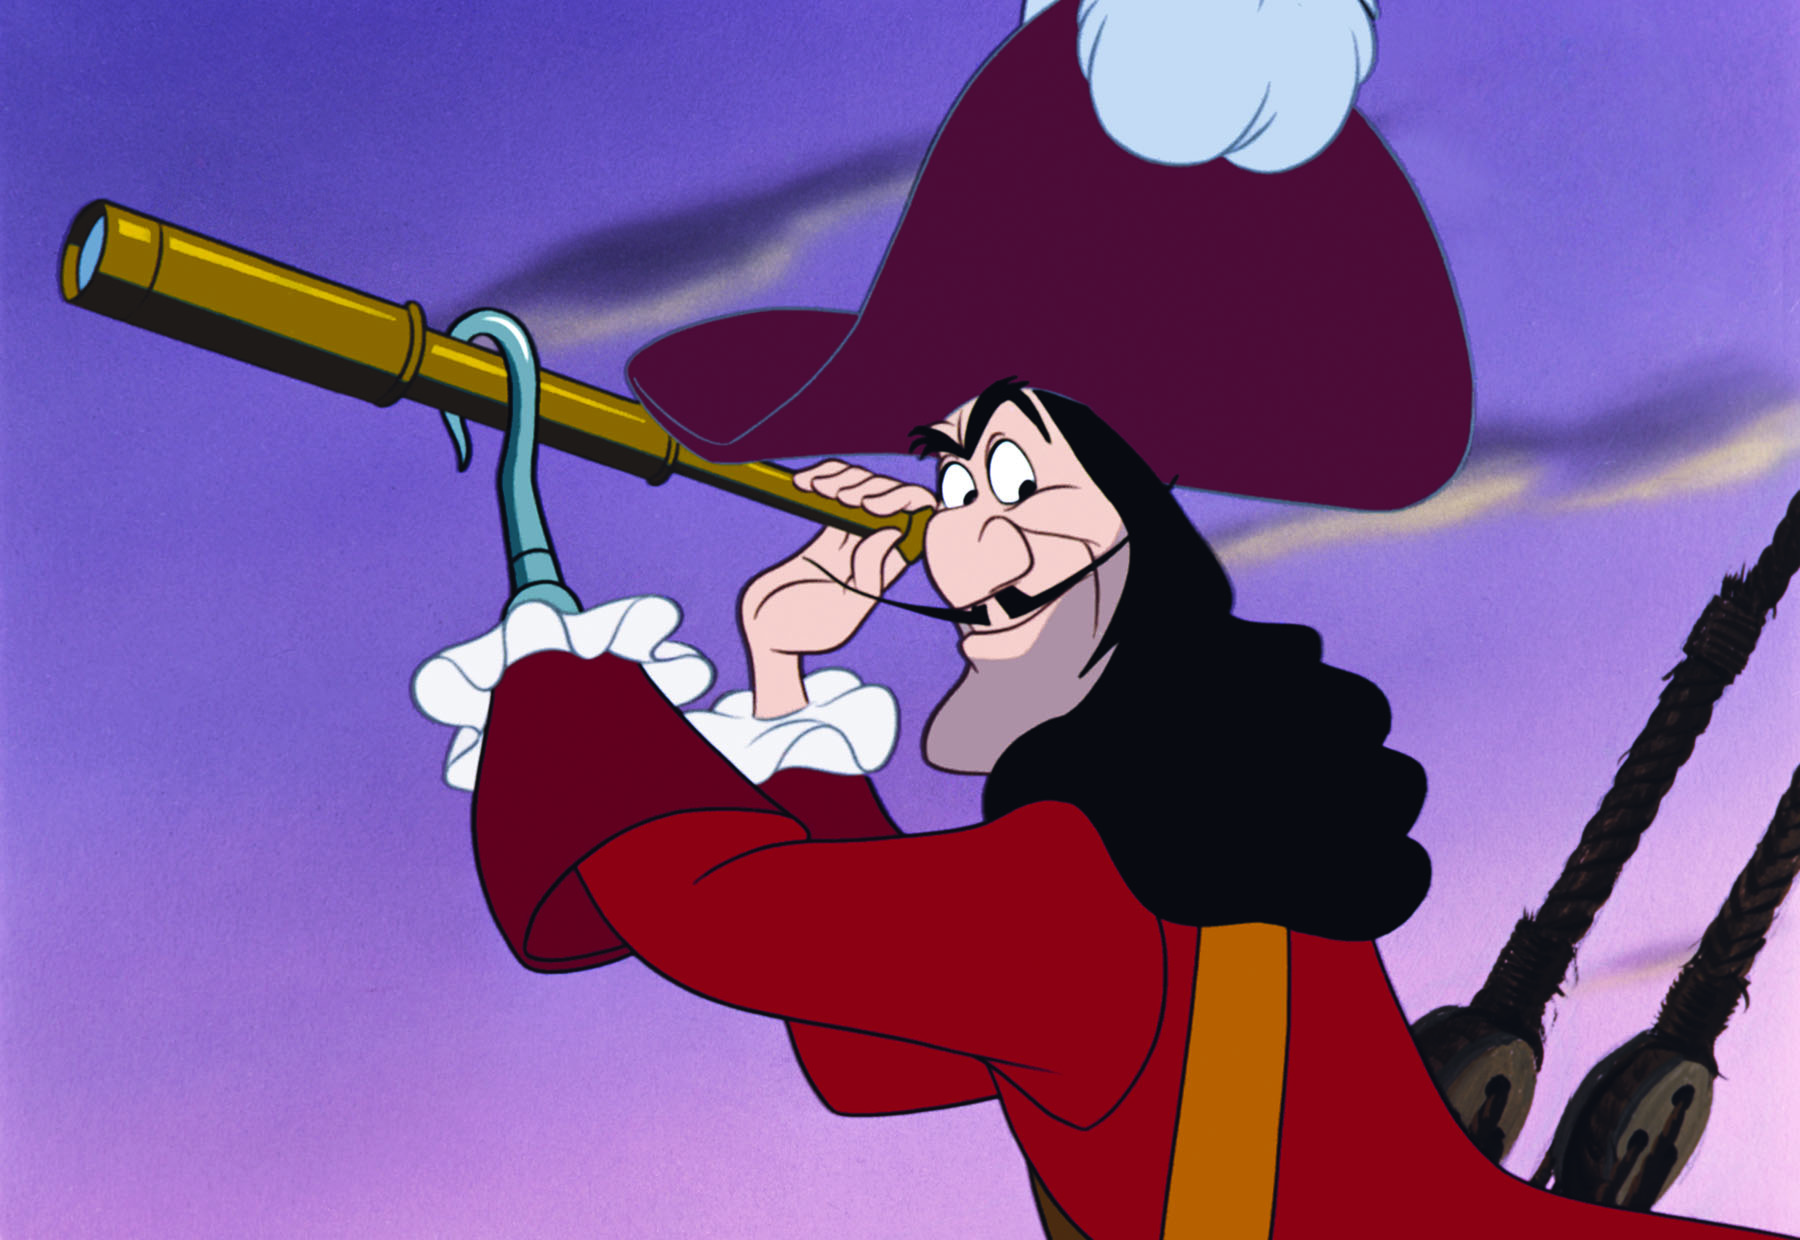 Captain James Hook searches for the Diamond Edition of Peter Pan.